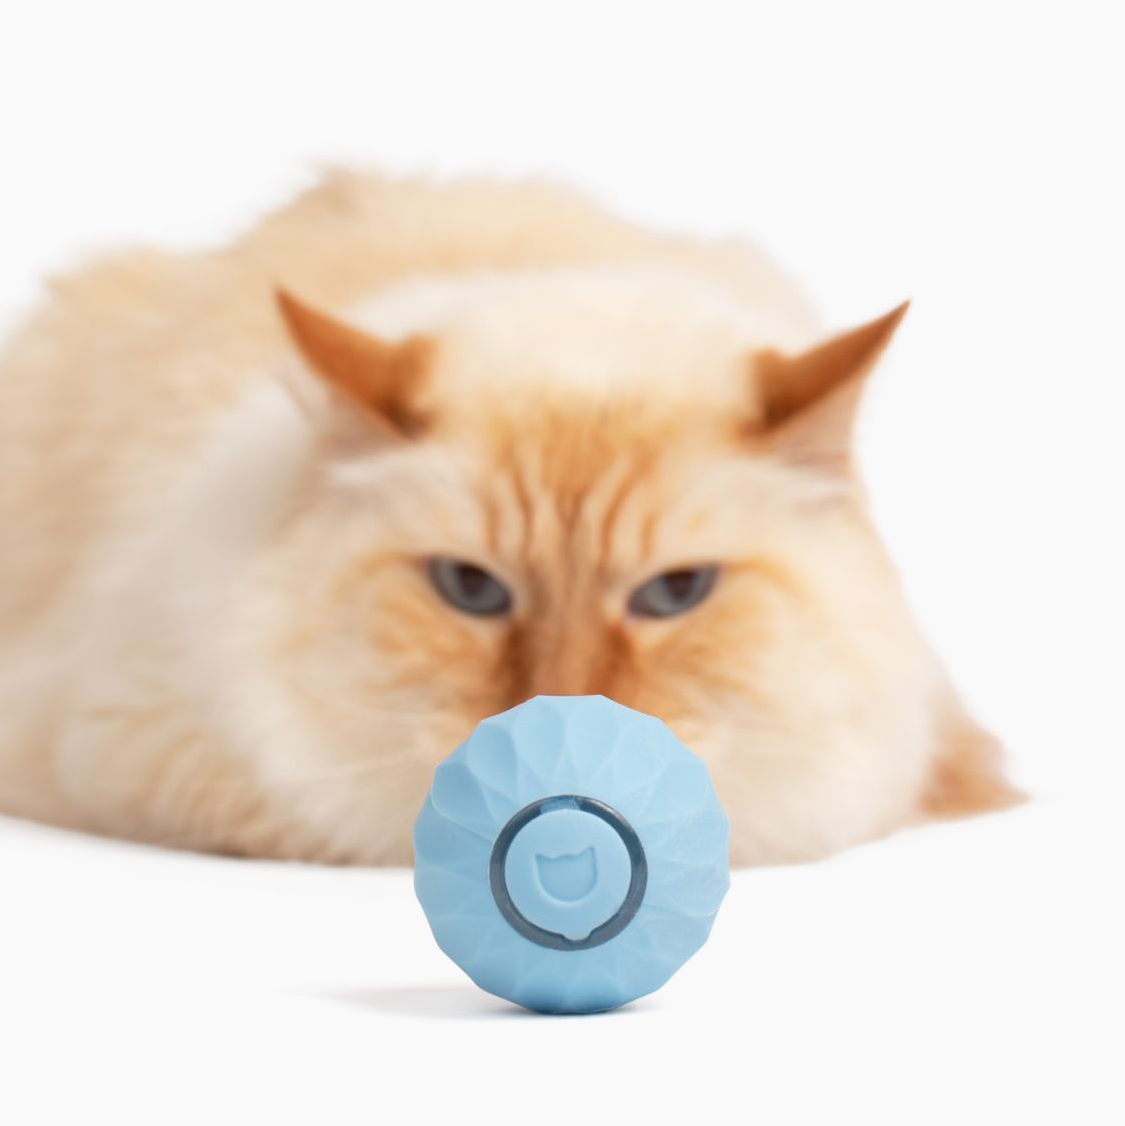 Wloom Power Ball 2.0 Cat Toy, Aiveys Smart Ball Cat, Gertar Cat Toy, USB  Charging Smart Pet Toy Ball, Interactive Pet Ball for Cat, 2 in 1 Automatic